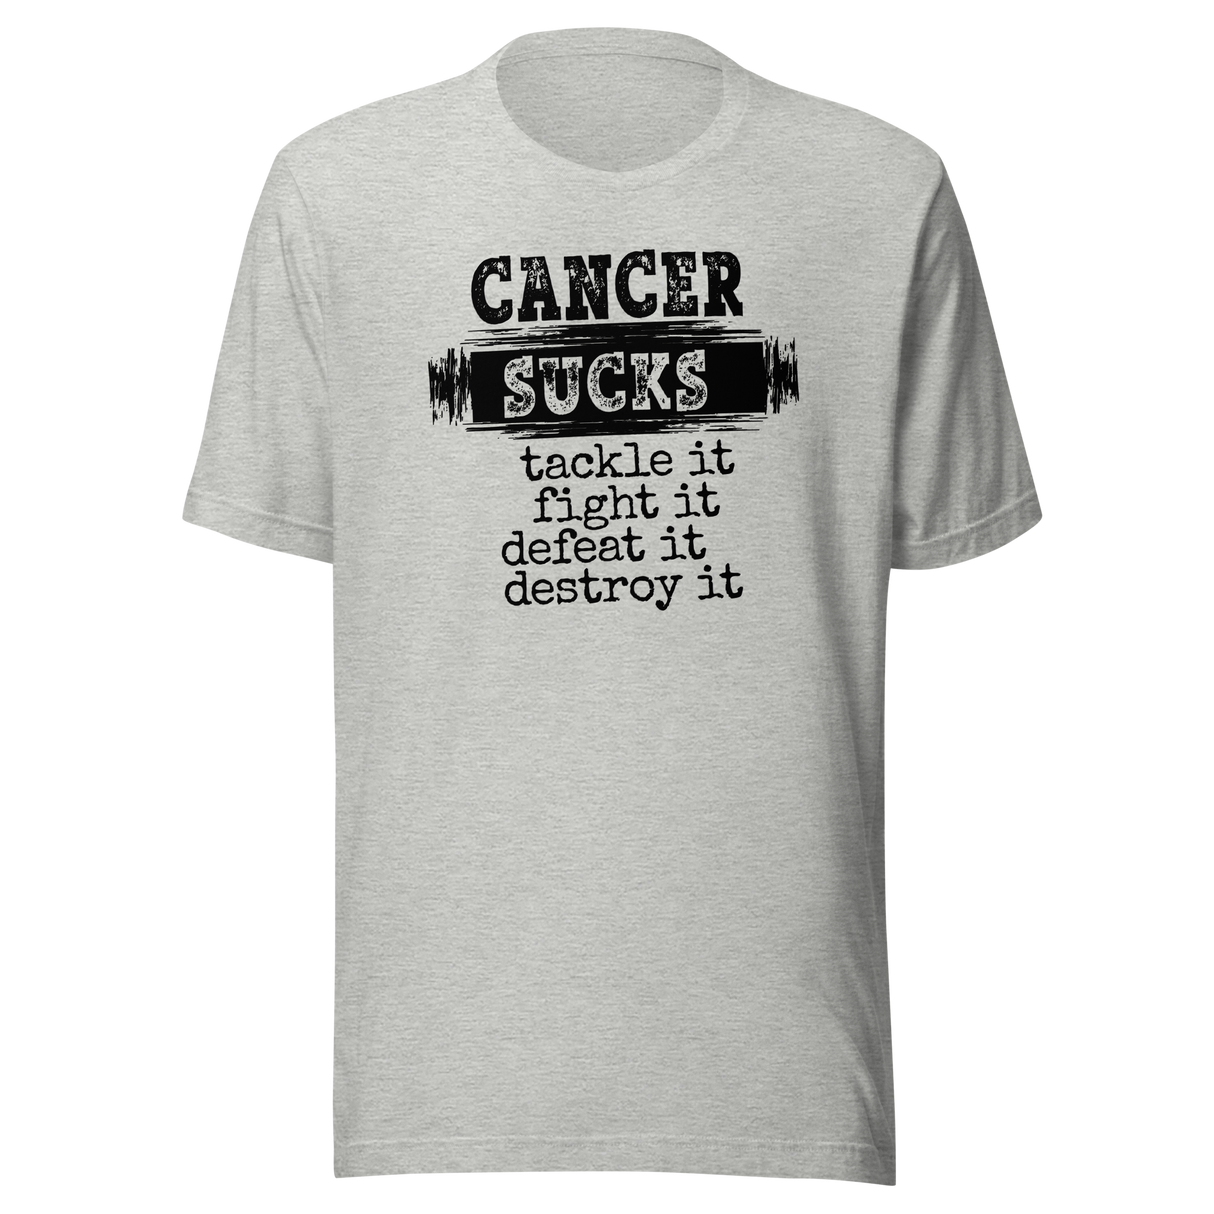 Cancer Sucks Tackle It Fight It Defeat It Destroy It - Cancer Tee - Nurse T-Shirt - Hope Tee - Strength T-Shirt - Courage Tee